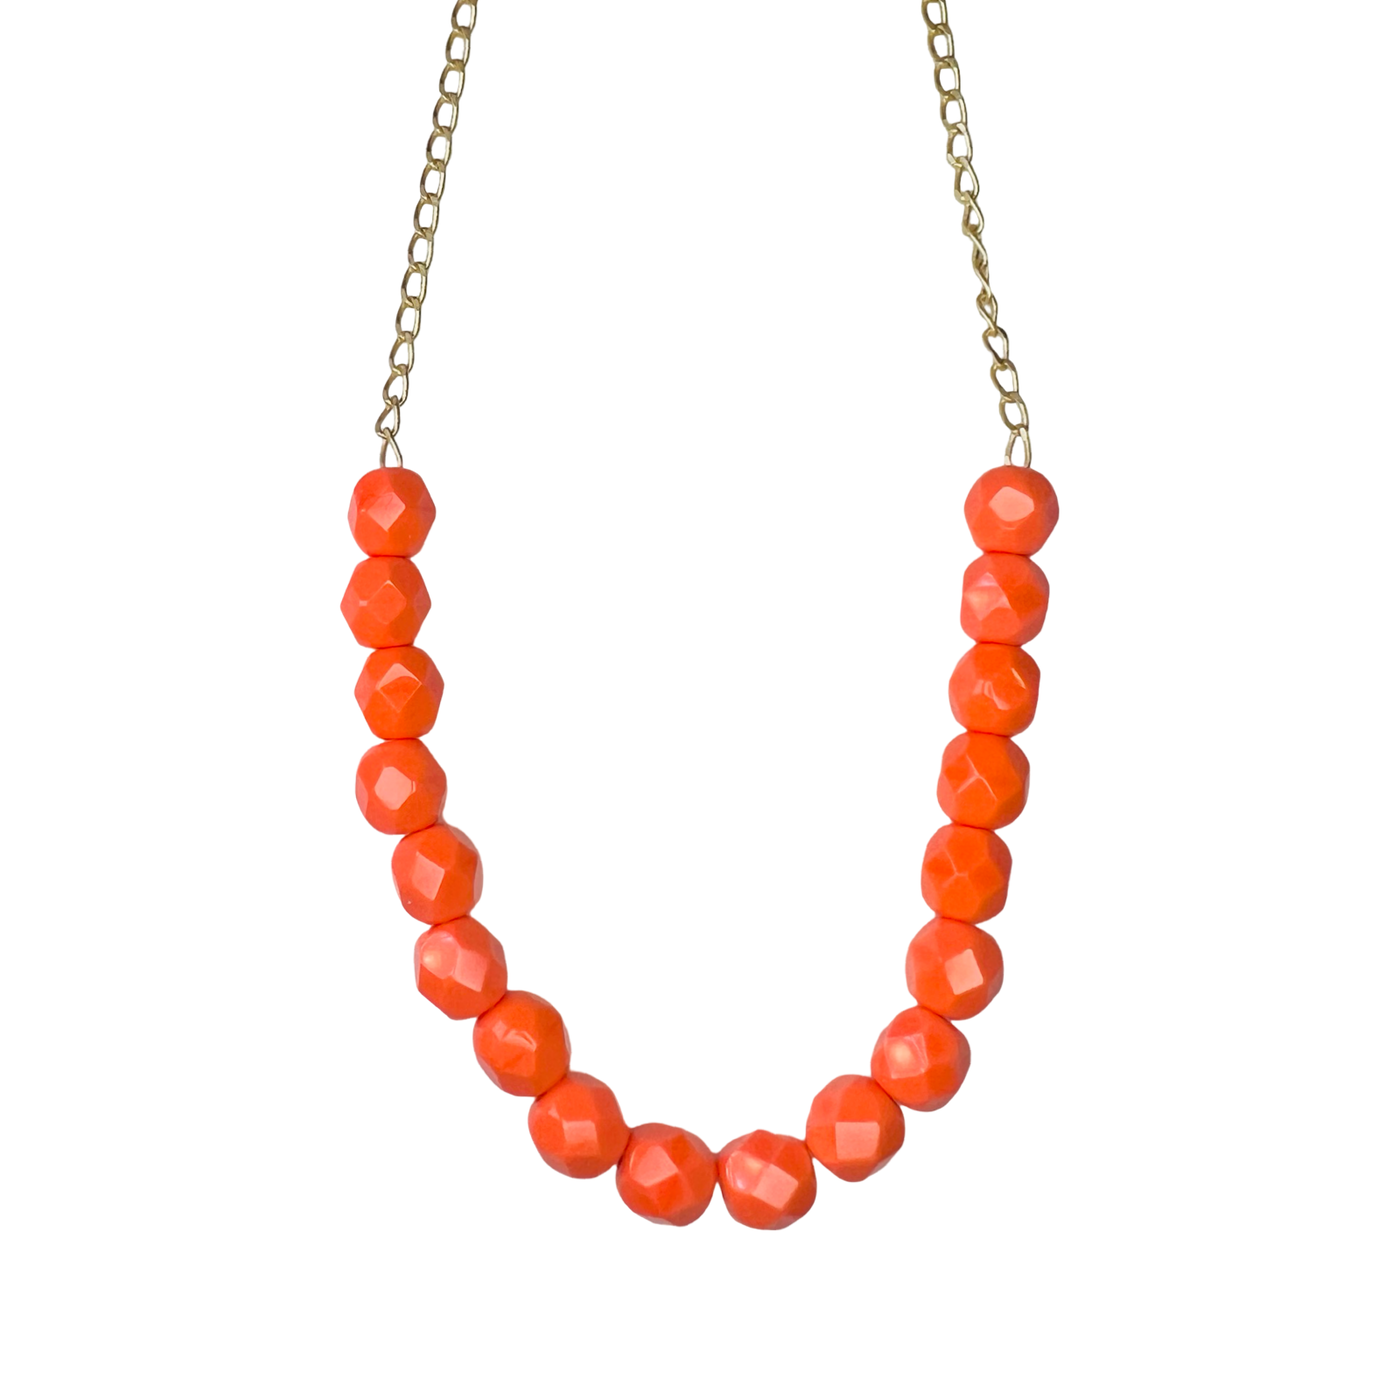 Orange bead necklace with a gold chain